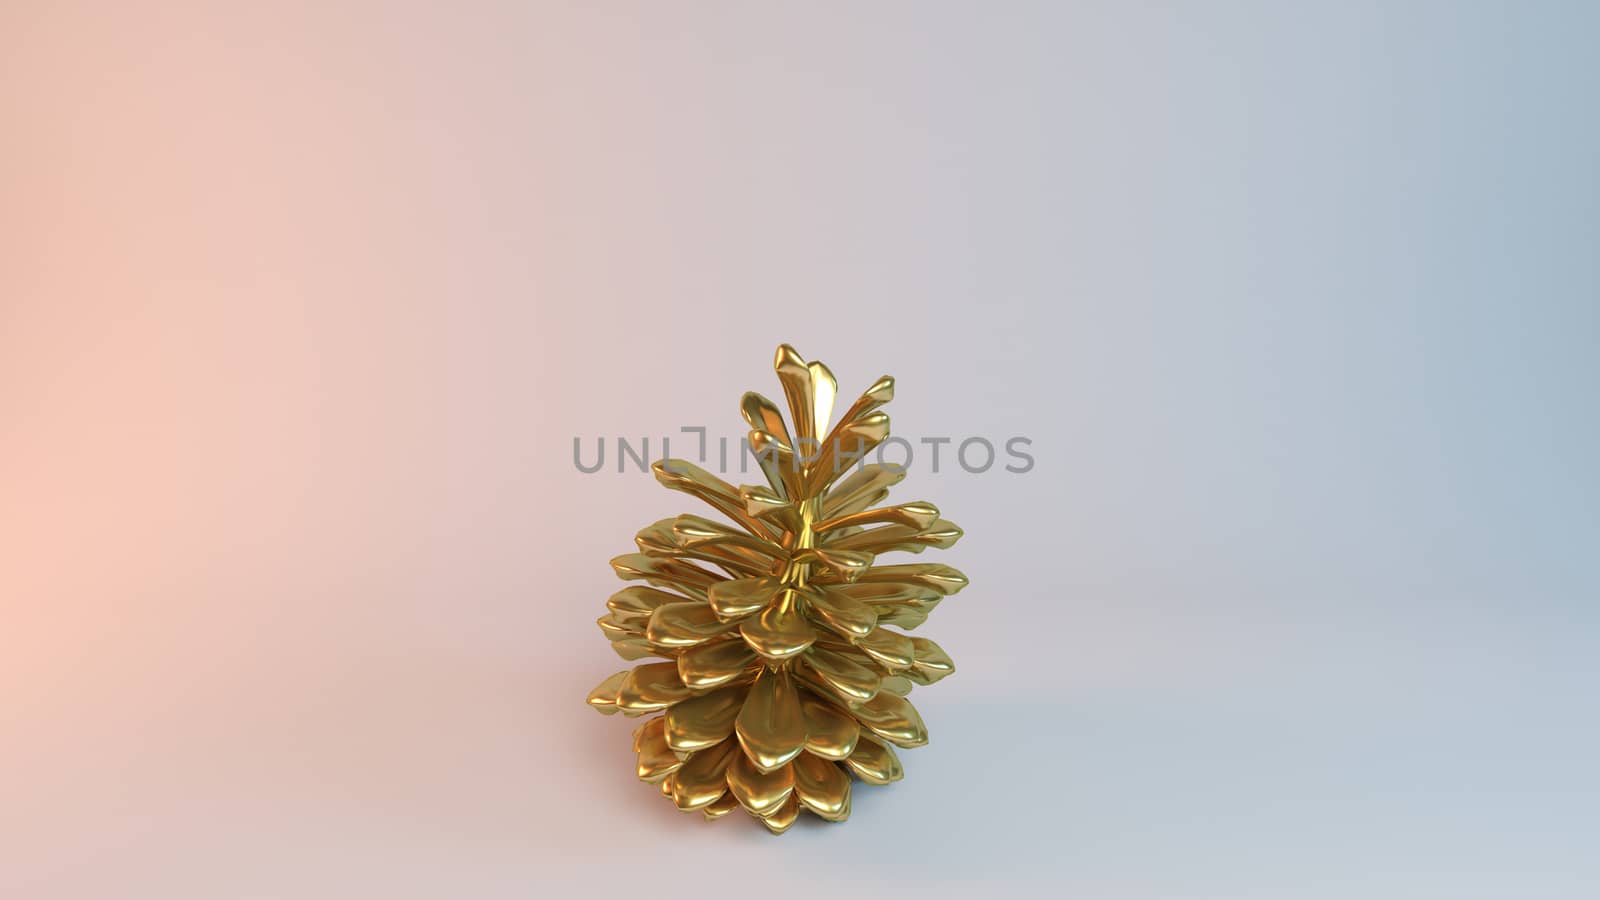 Golden 3D object (Pine) inside a white reflected stage with high render quality to be used as a logo, medal, symbol, shape, emblem, icon, business, geometric, label or any other use